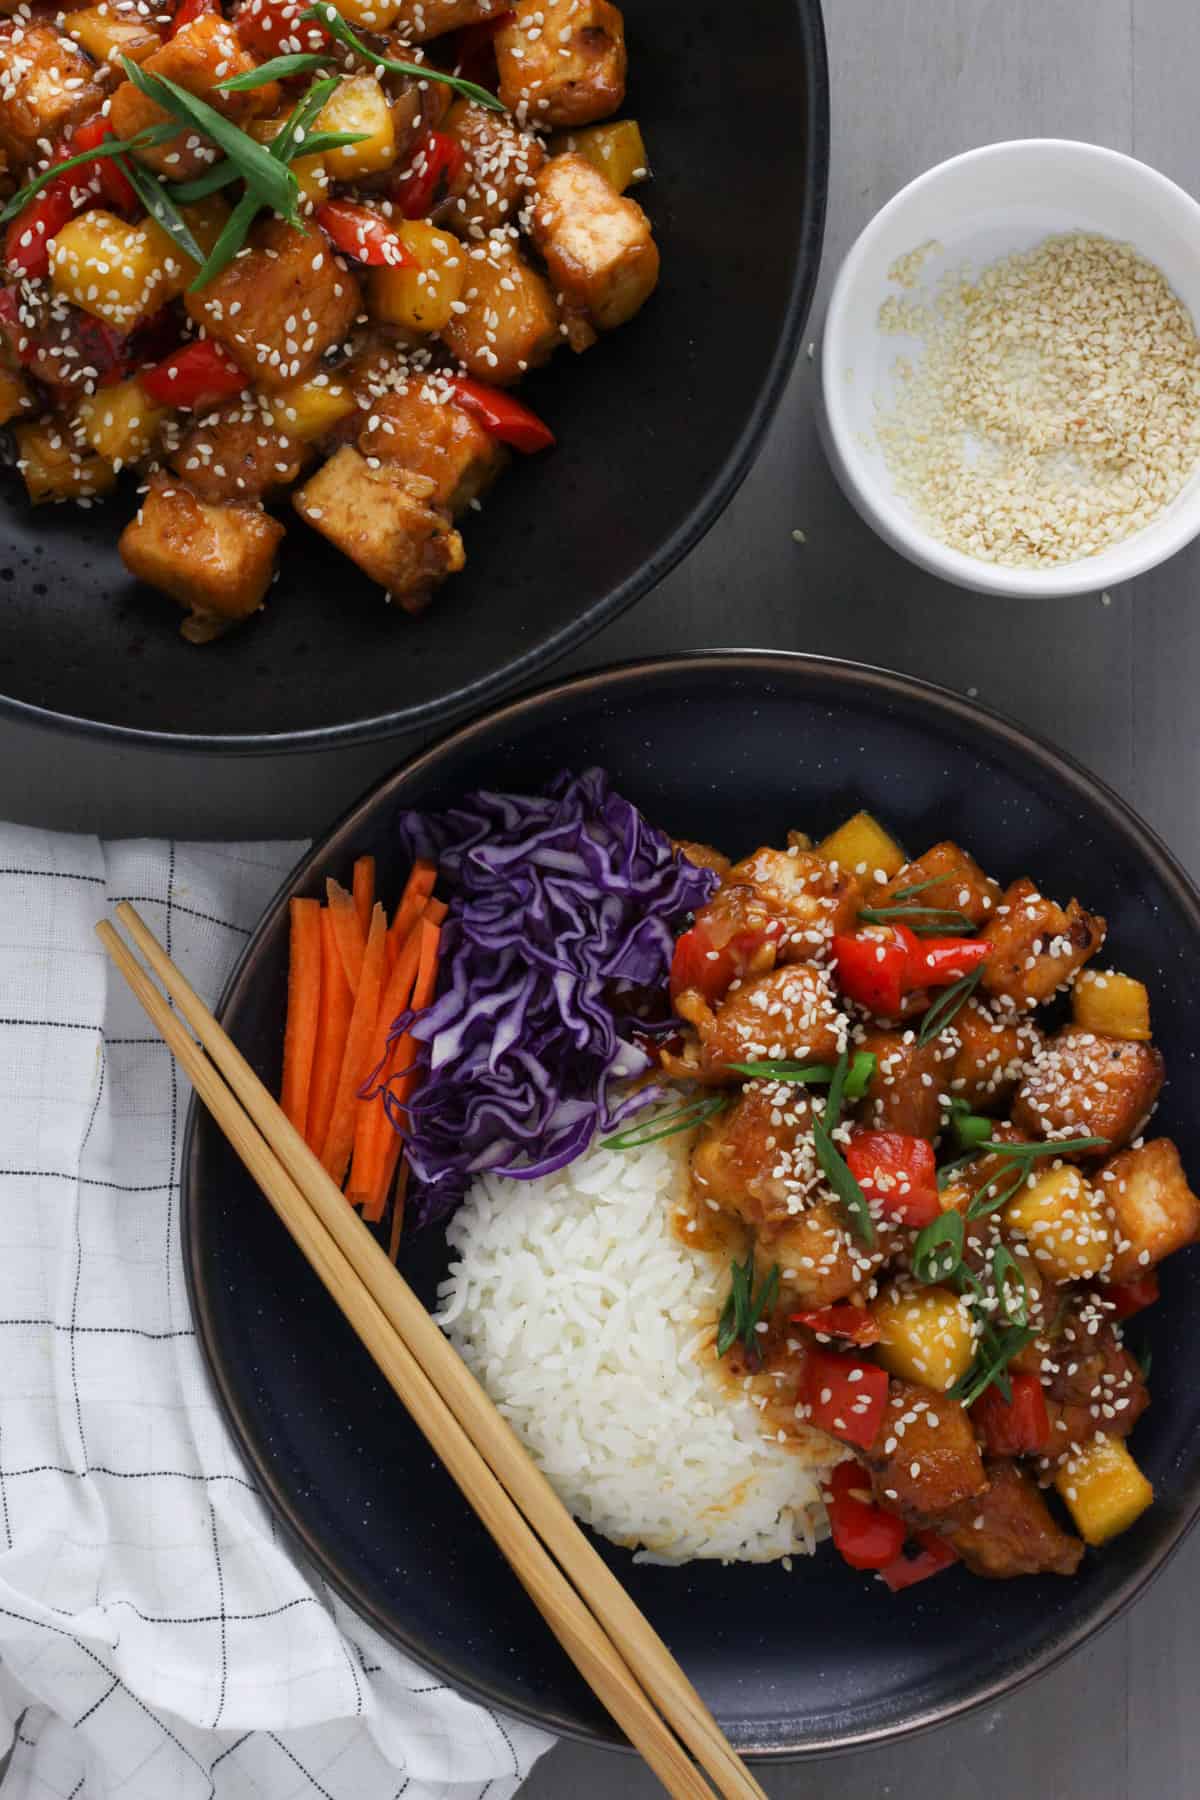 A dark blue bowl with white rice, thinly sliced red cabbage and matchsticks of carrots with cubed tofu, red pepper and onions in a sweet and sour sauce, all topped with sesame seeds and scallions. There are bamboo chopsticks on the edge of the bowl and another platter of sweet and sour tofu off center, along with a small bowl of sesame seeds.